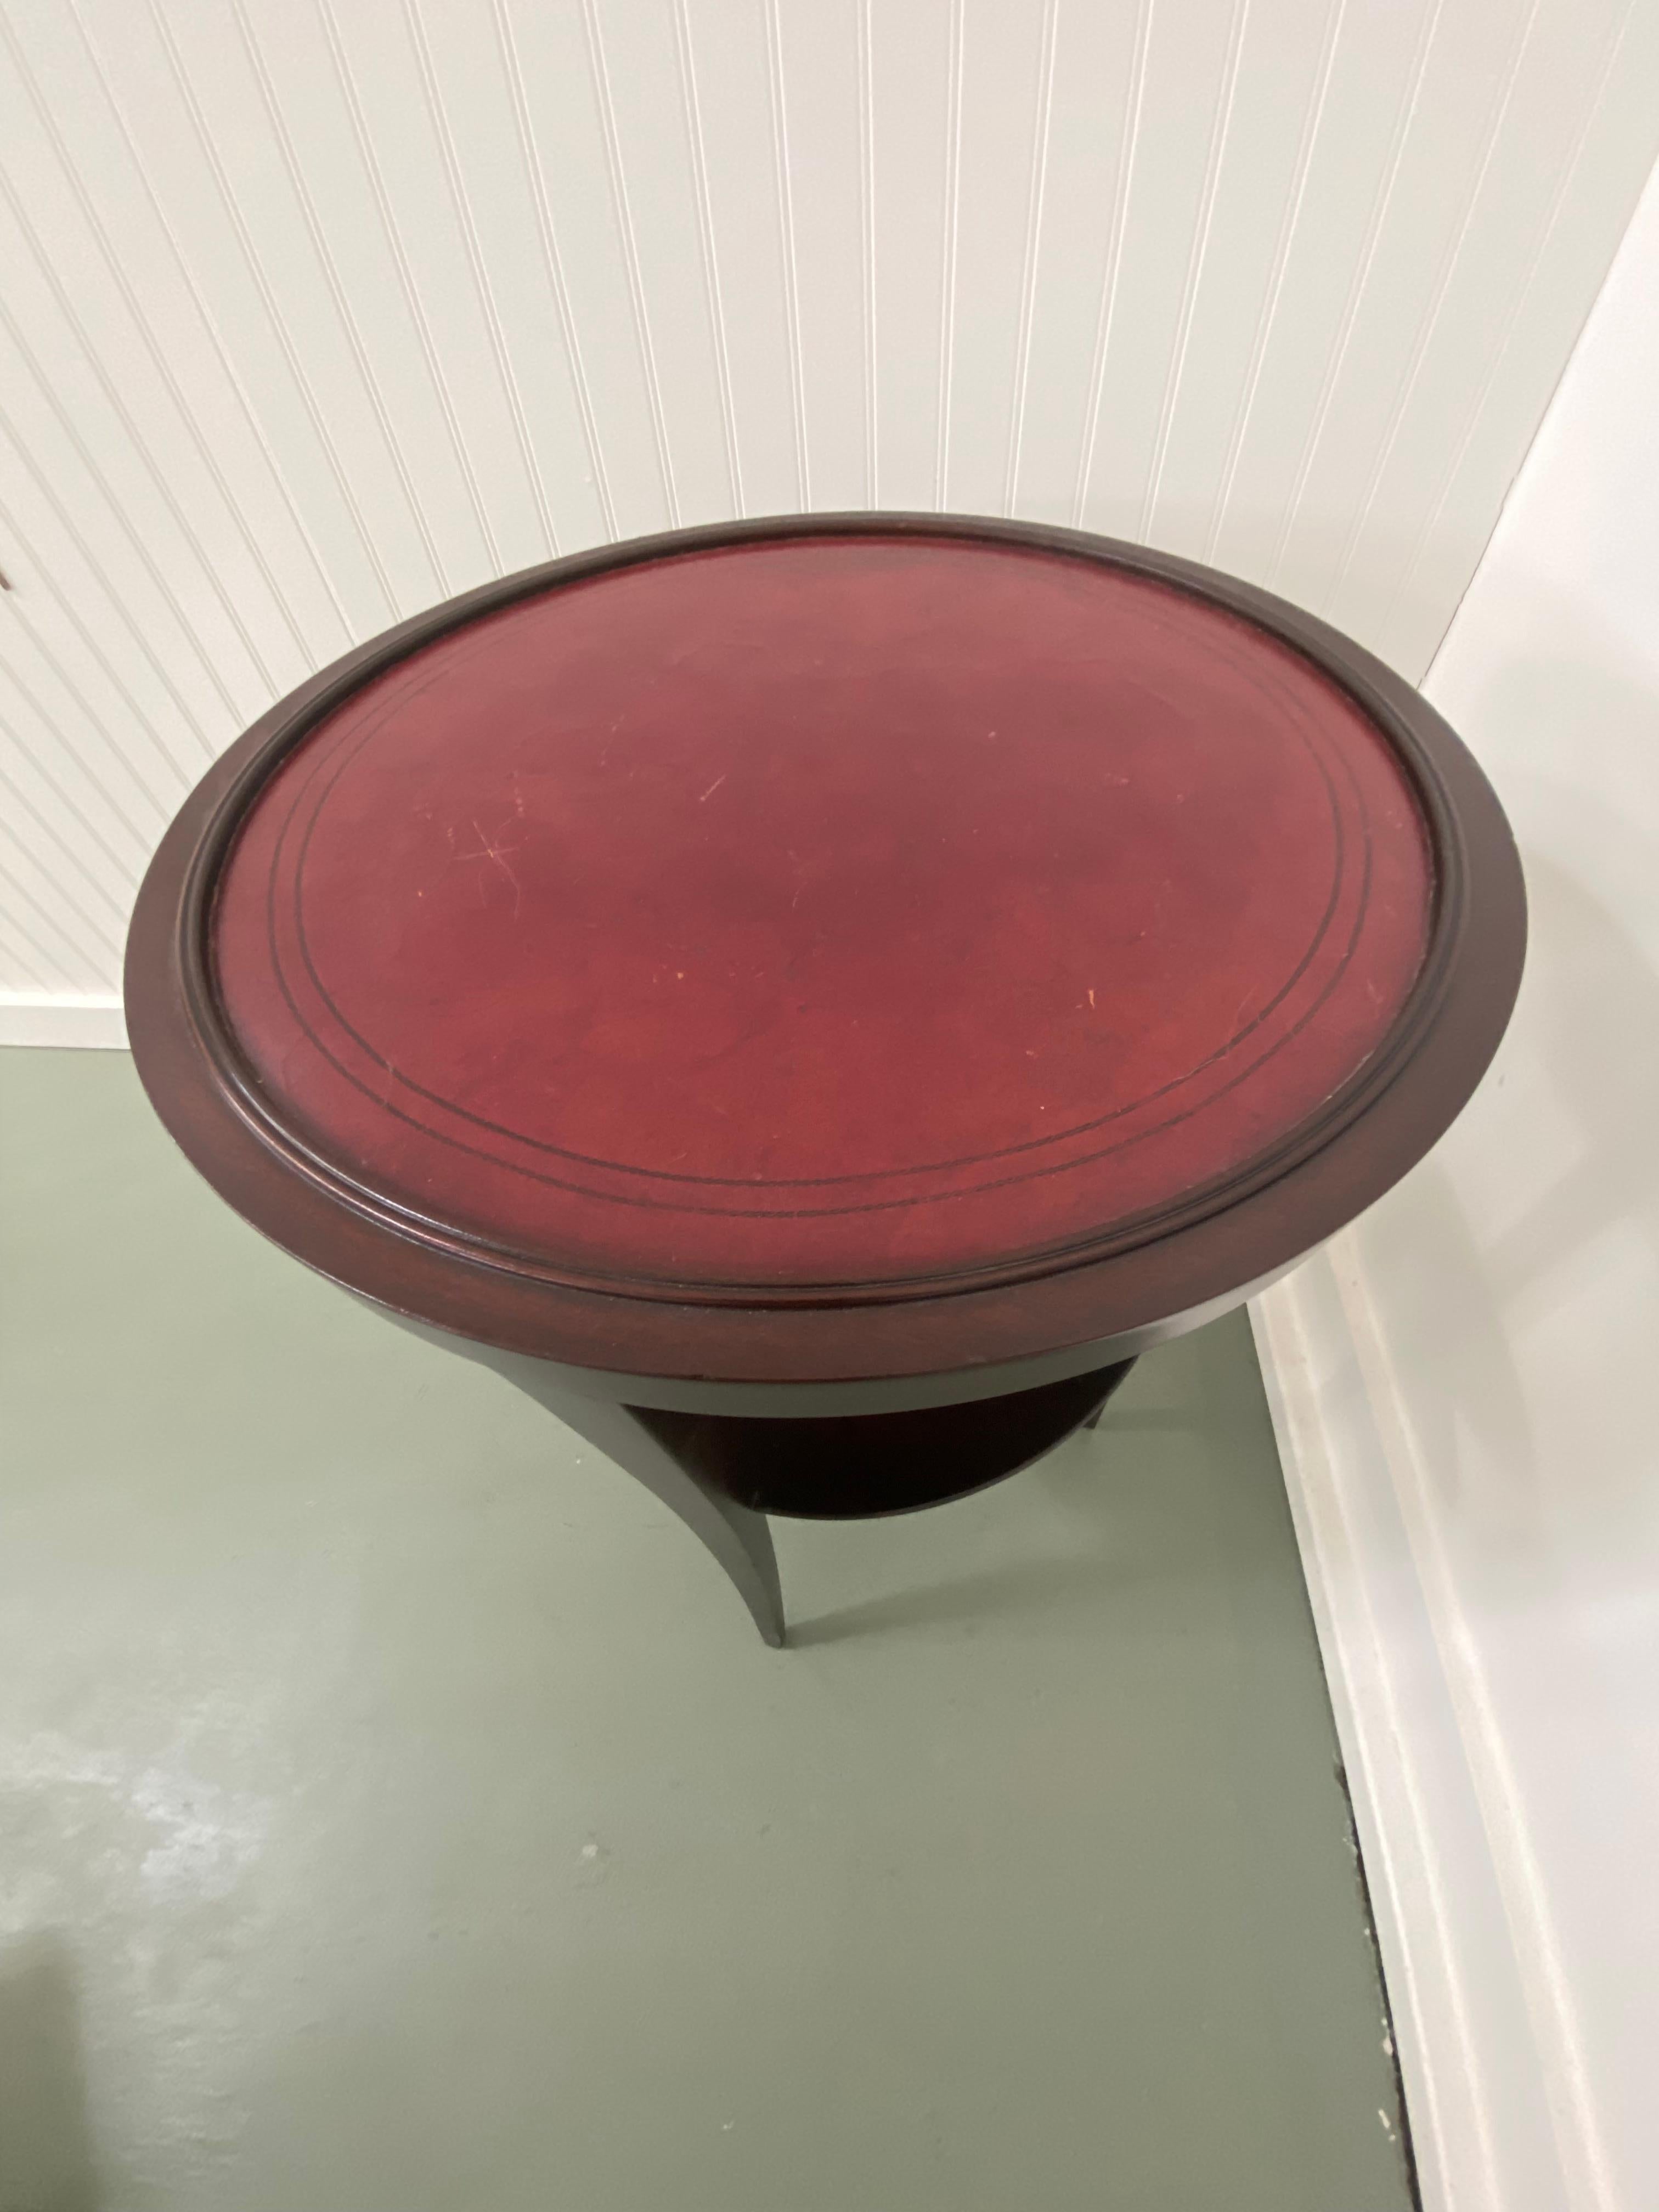 Hollywood Regency Tommi Parzinger for Charak Modern tiered round side table red leather mahogany